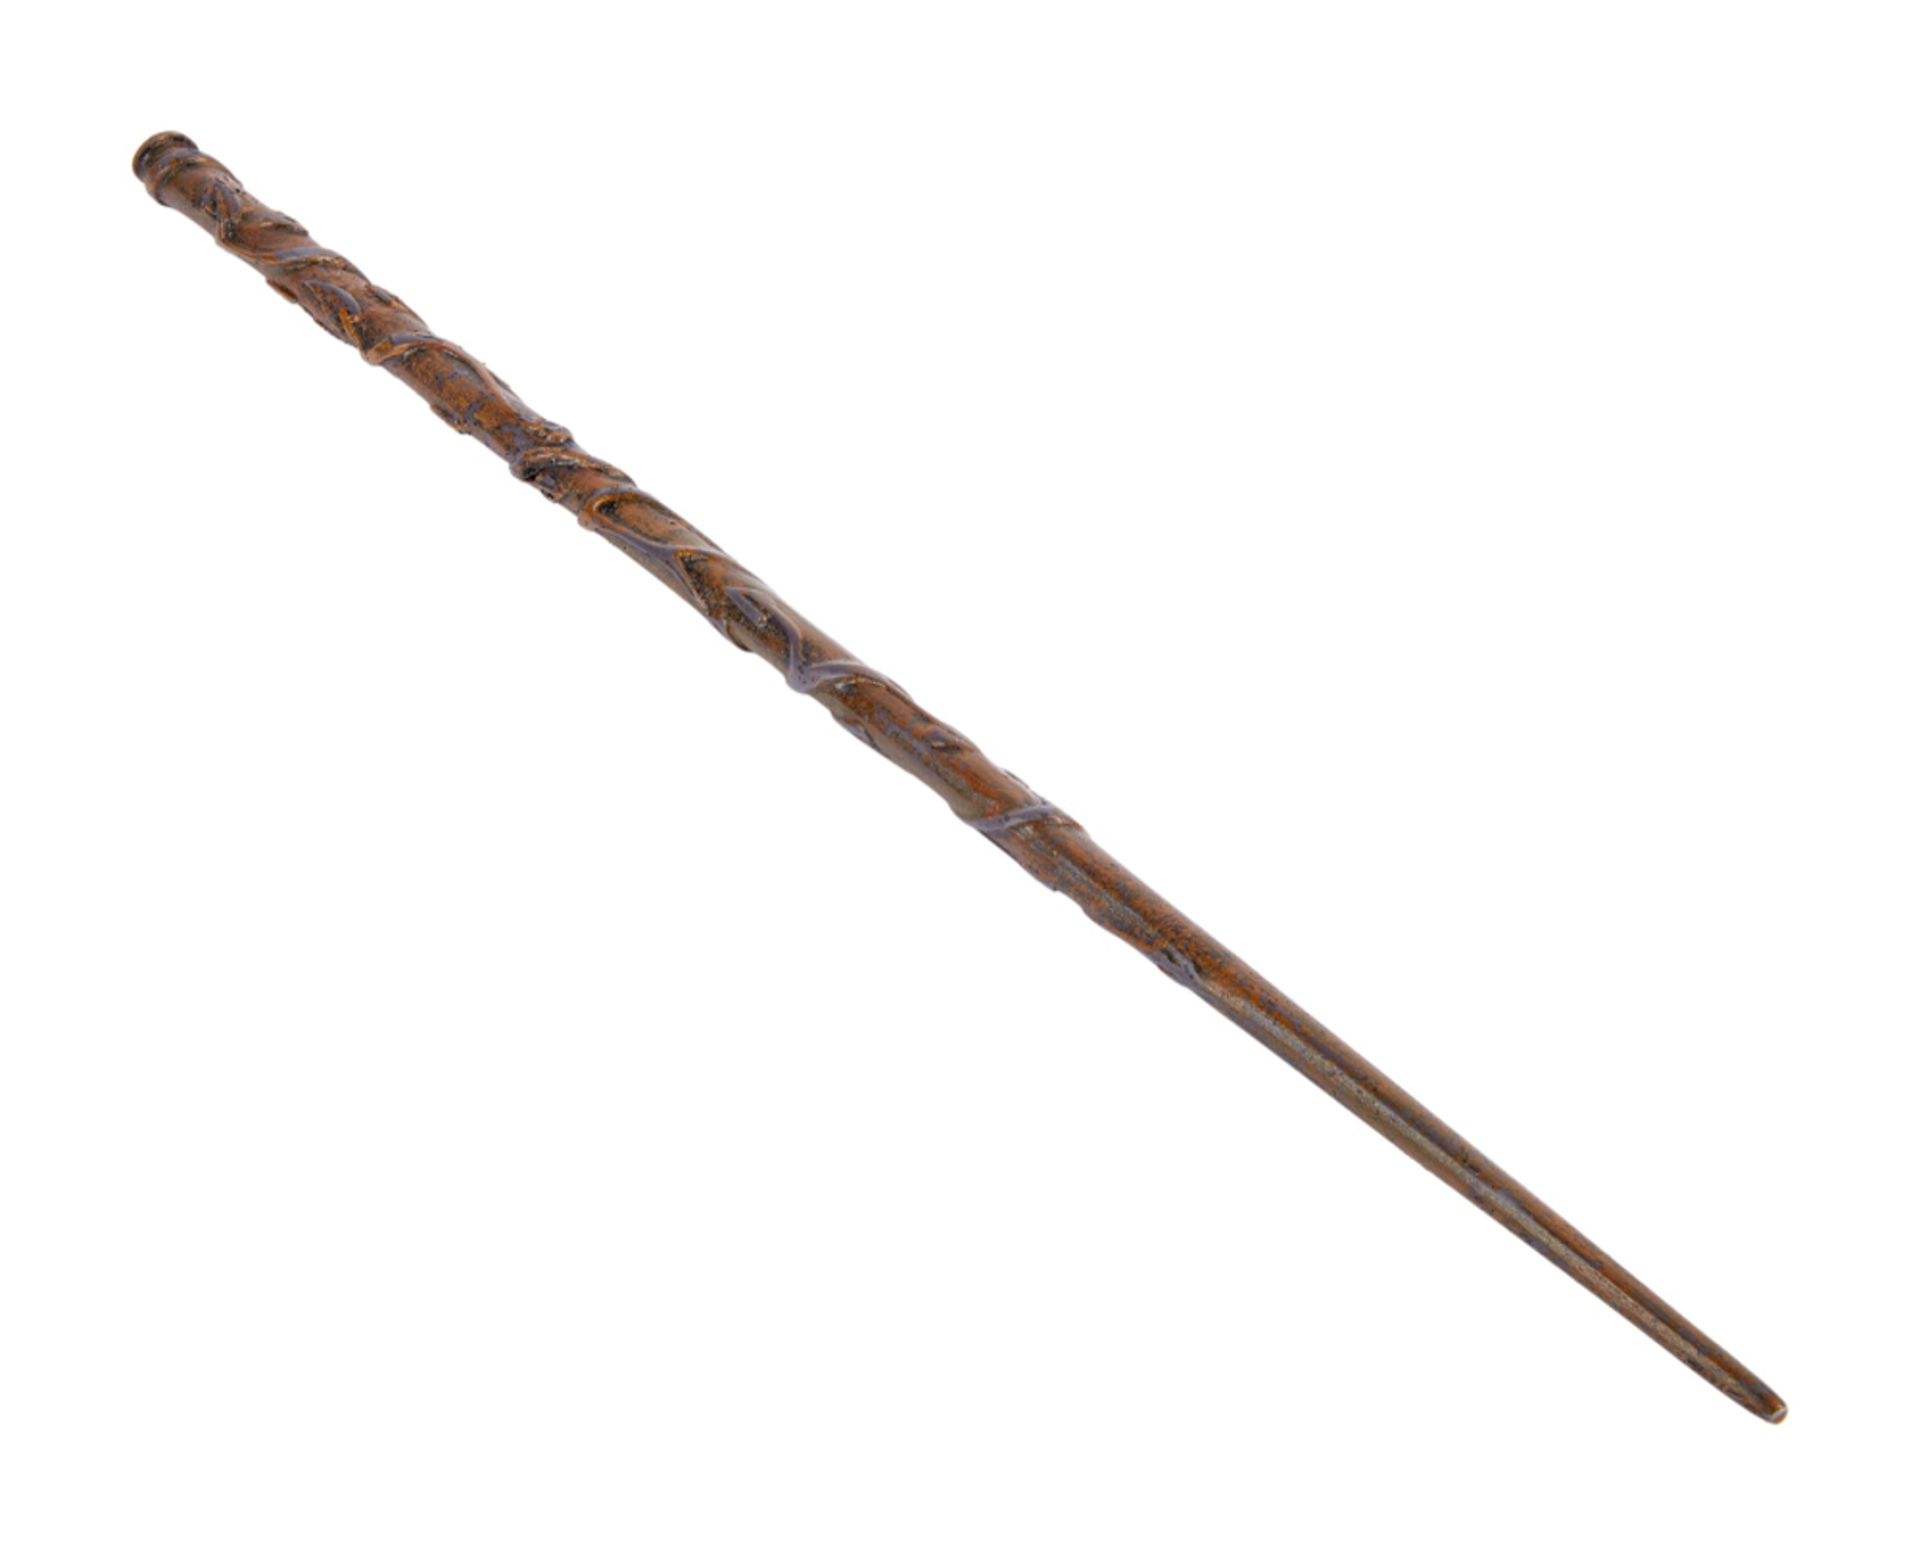 HARRY POTTER AND THE DEATHLY HALLOWS - PART 1 | EMMA WATSON "HERMIONE GRANGER" WAND PROP (WITH DVD) - Image 7 of 11